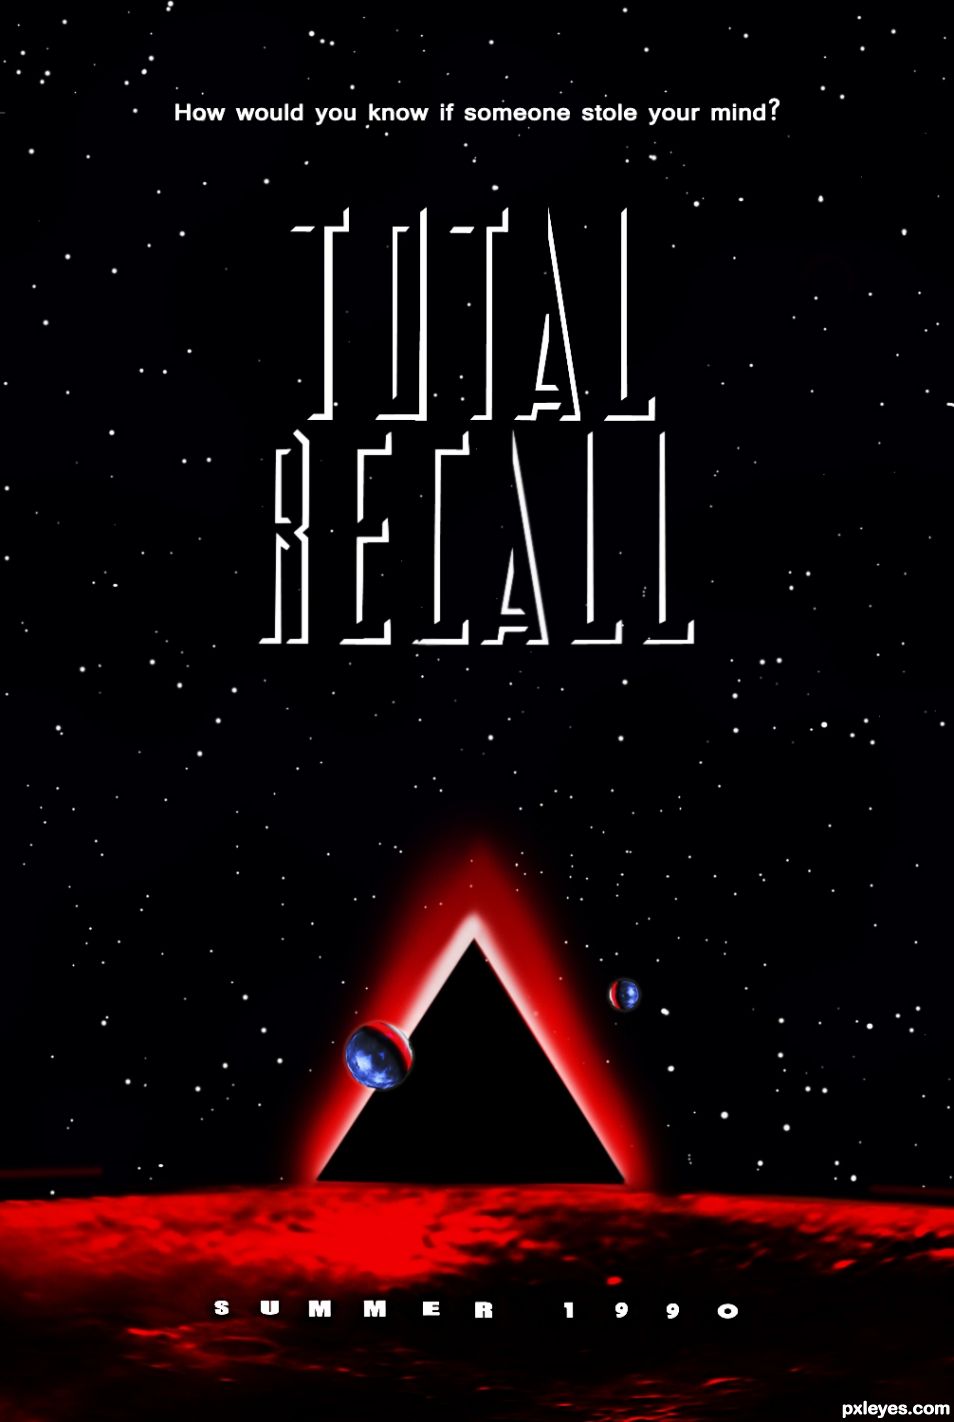 Creation of Total Recall 1990: Final Result